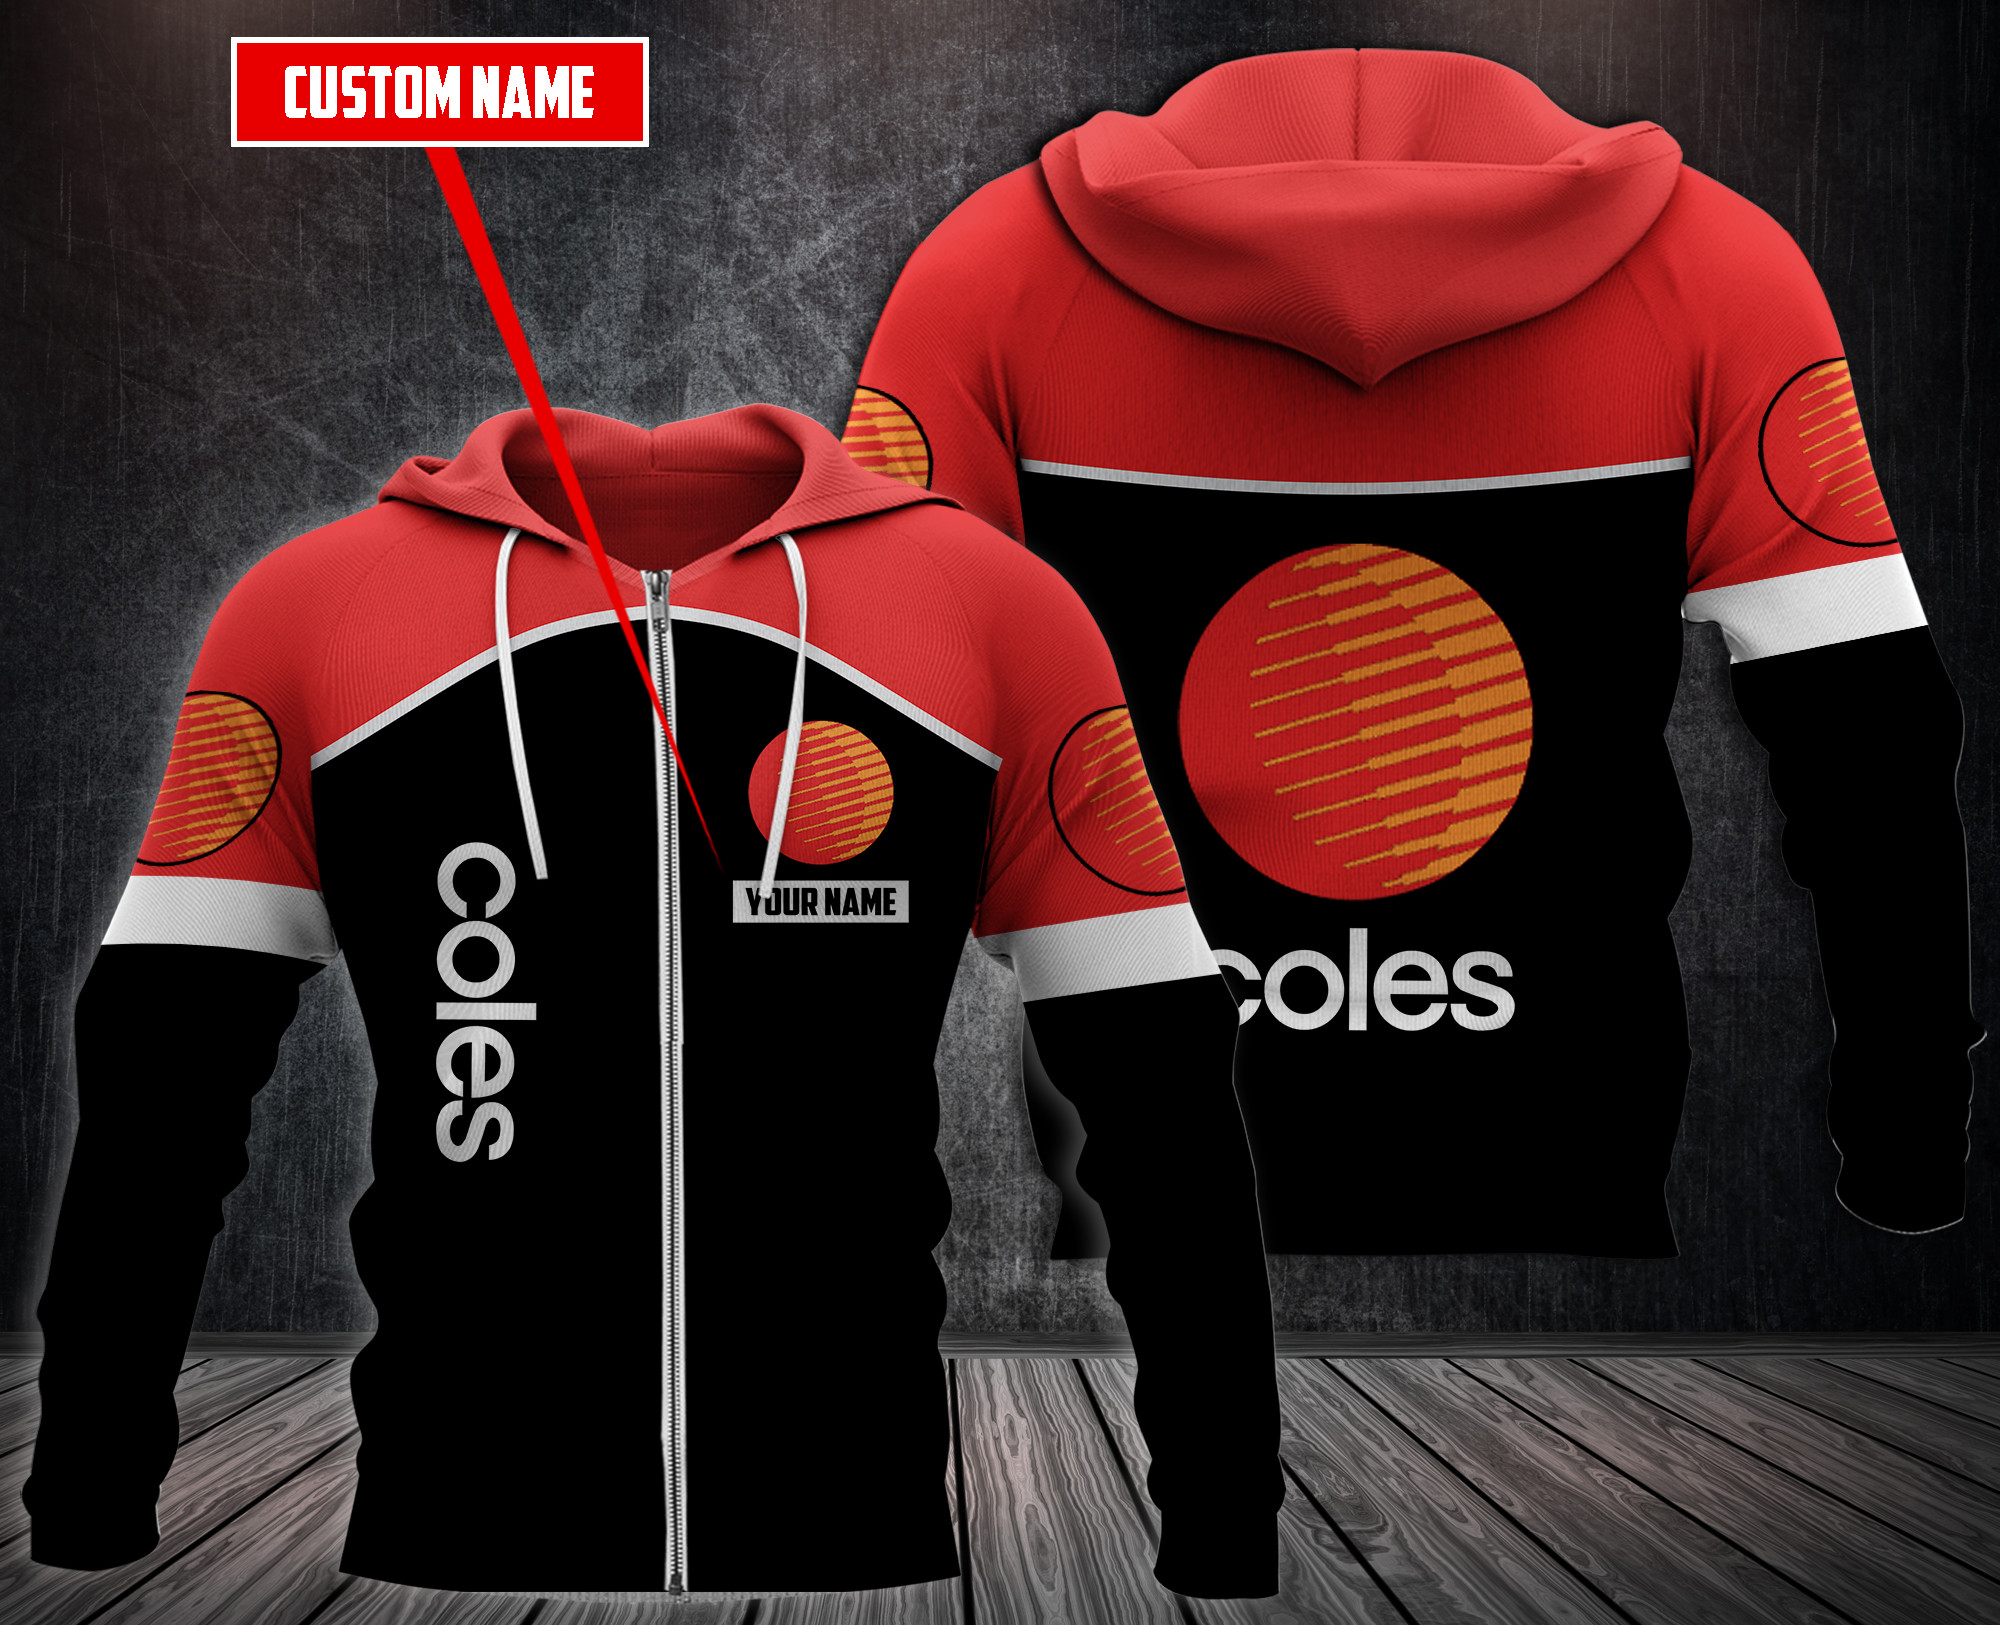 Choose the right hoodies for you on our boxboxshirt and ethershirt websites in 2022 131